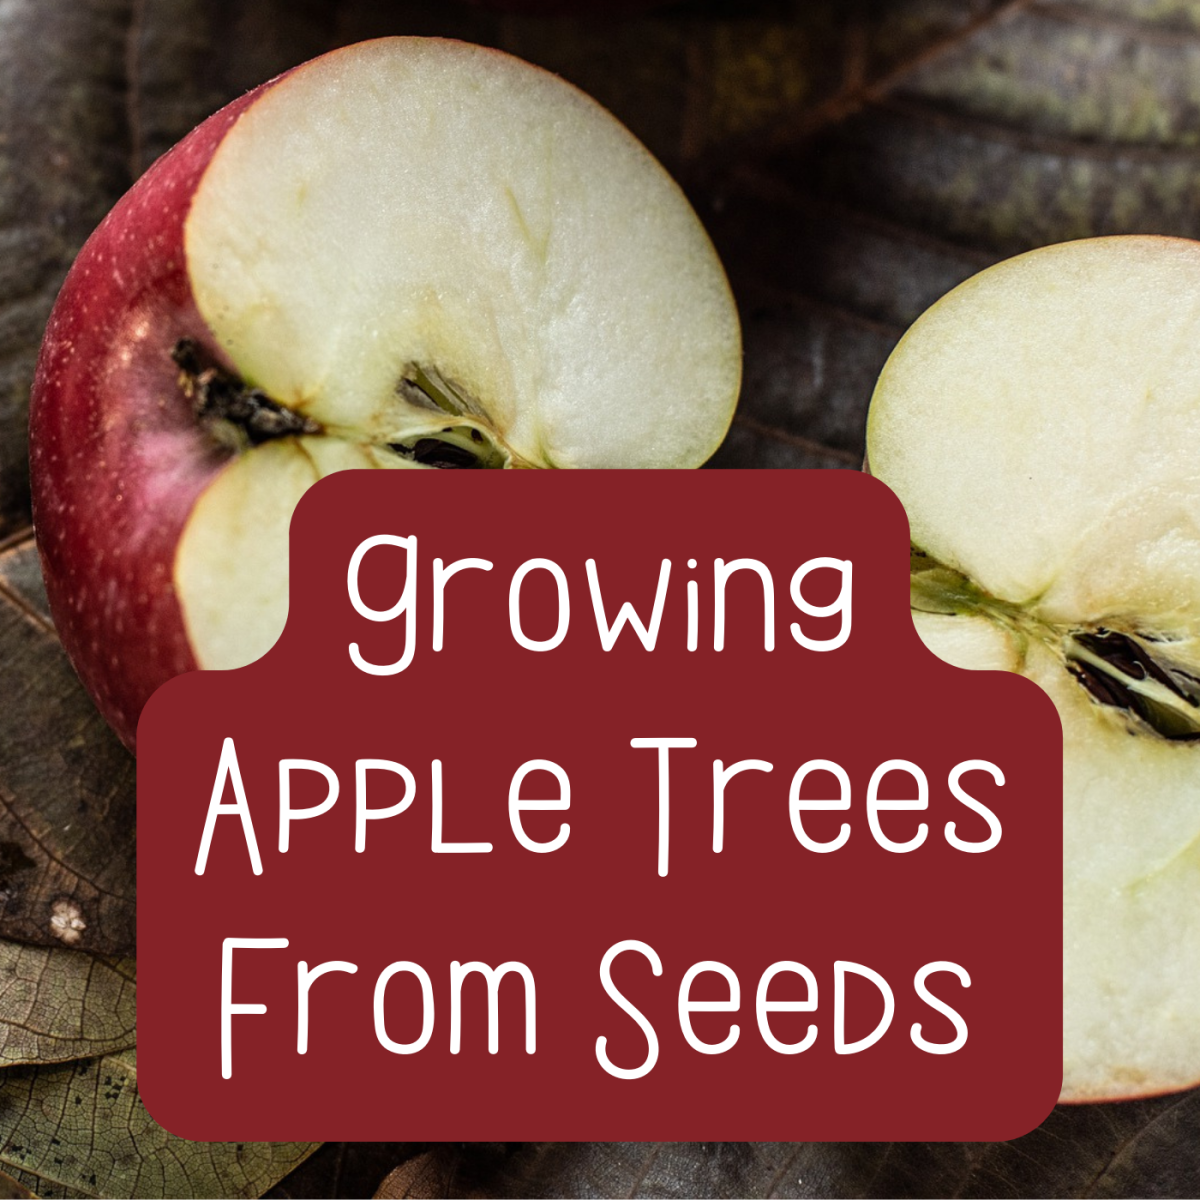 Did you know that you can plant any apple seed and grow a seedling? Learn how!